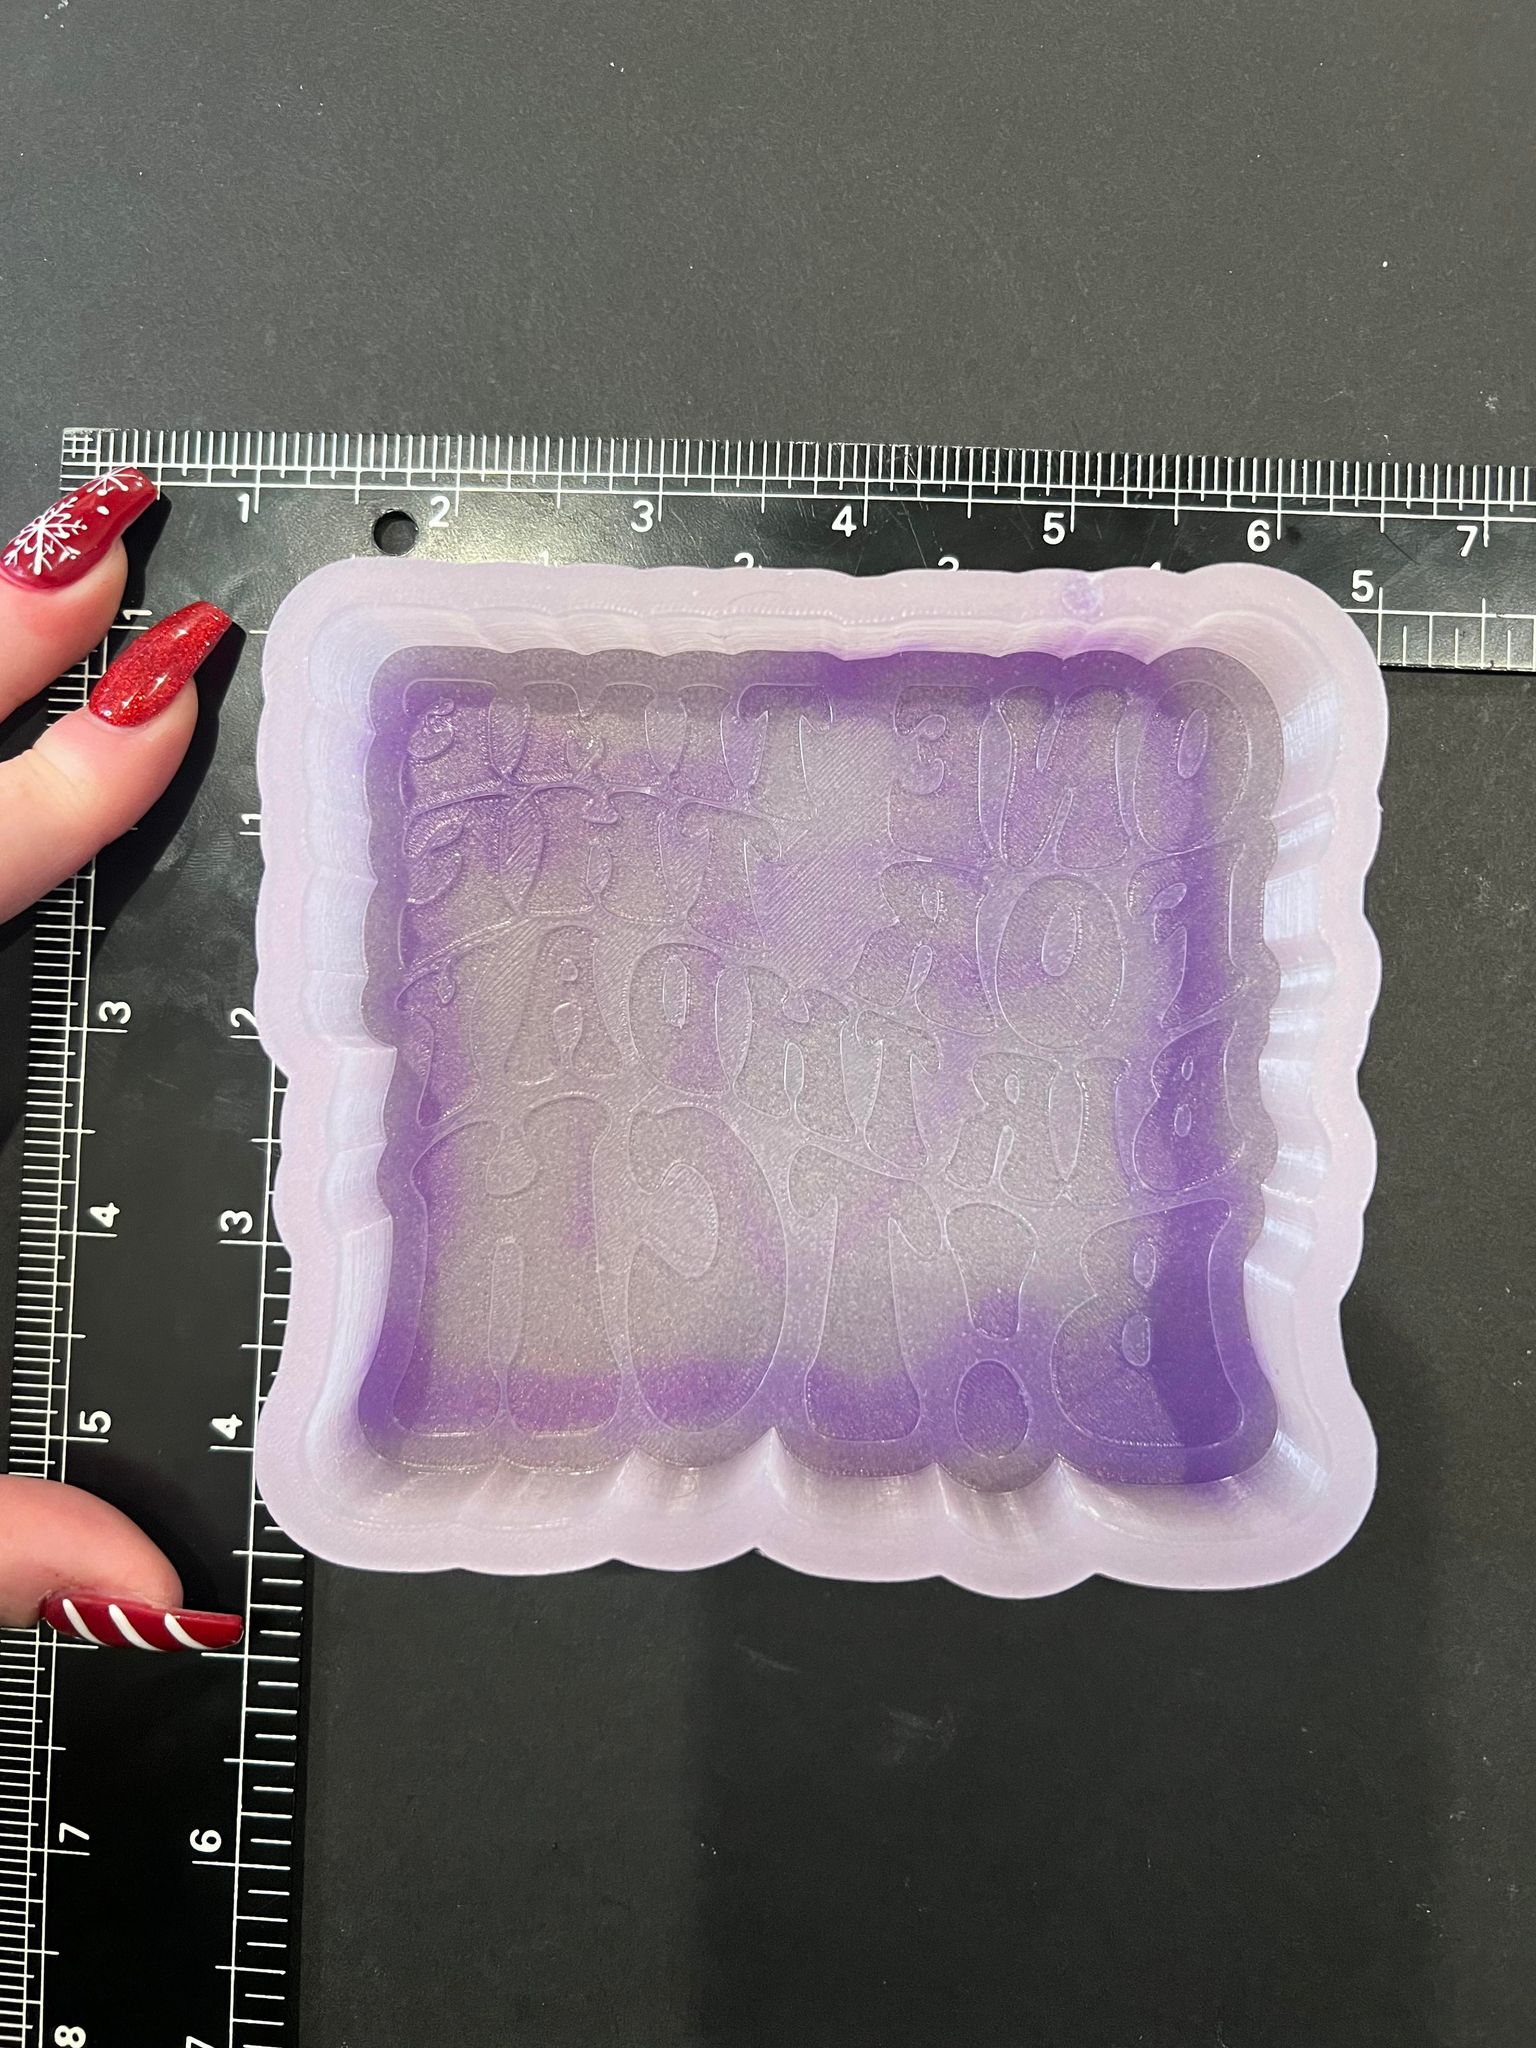 (A1020) One time for the birthday bitch Silicone Mold